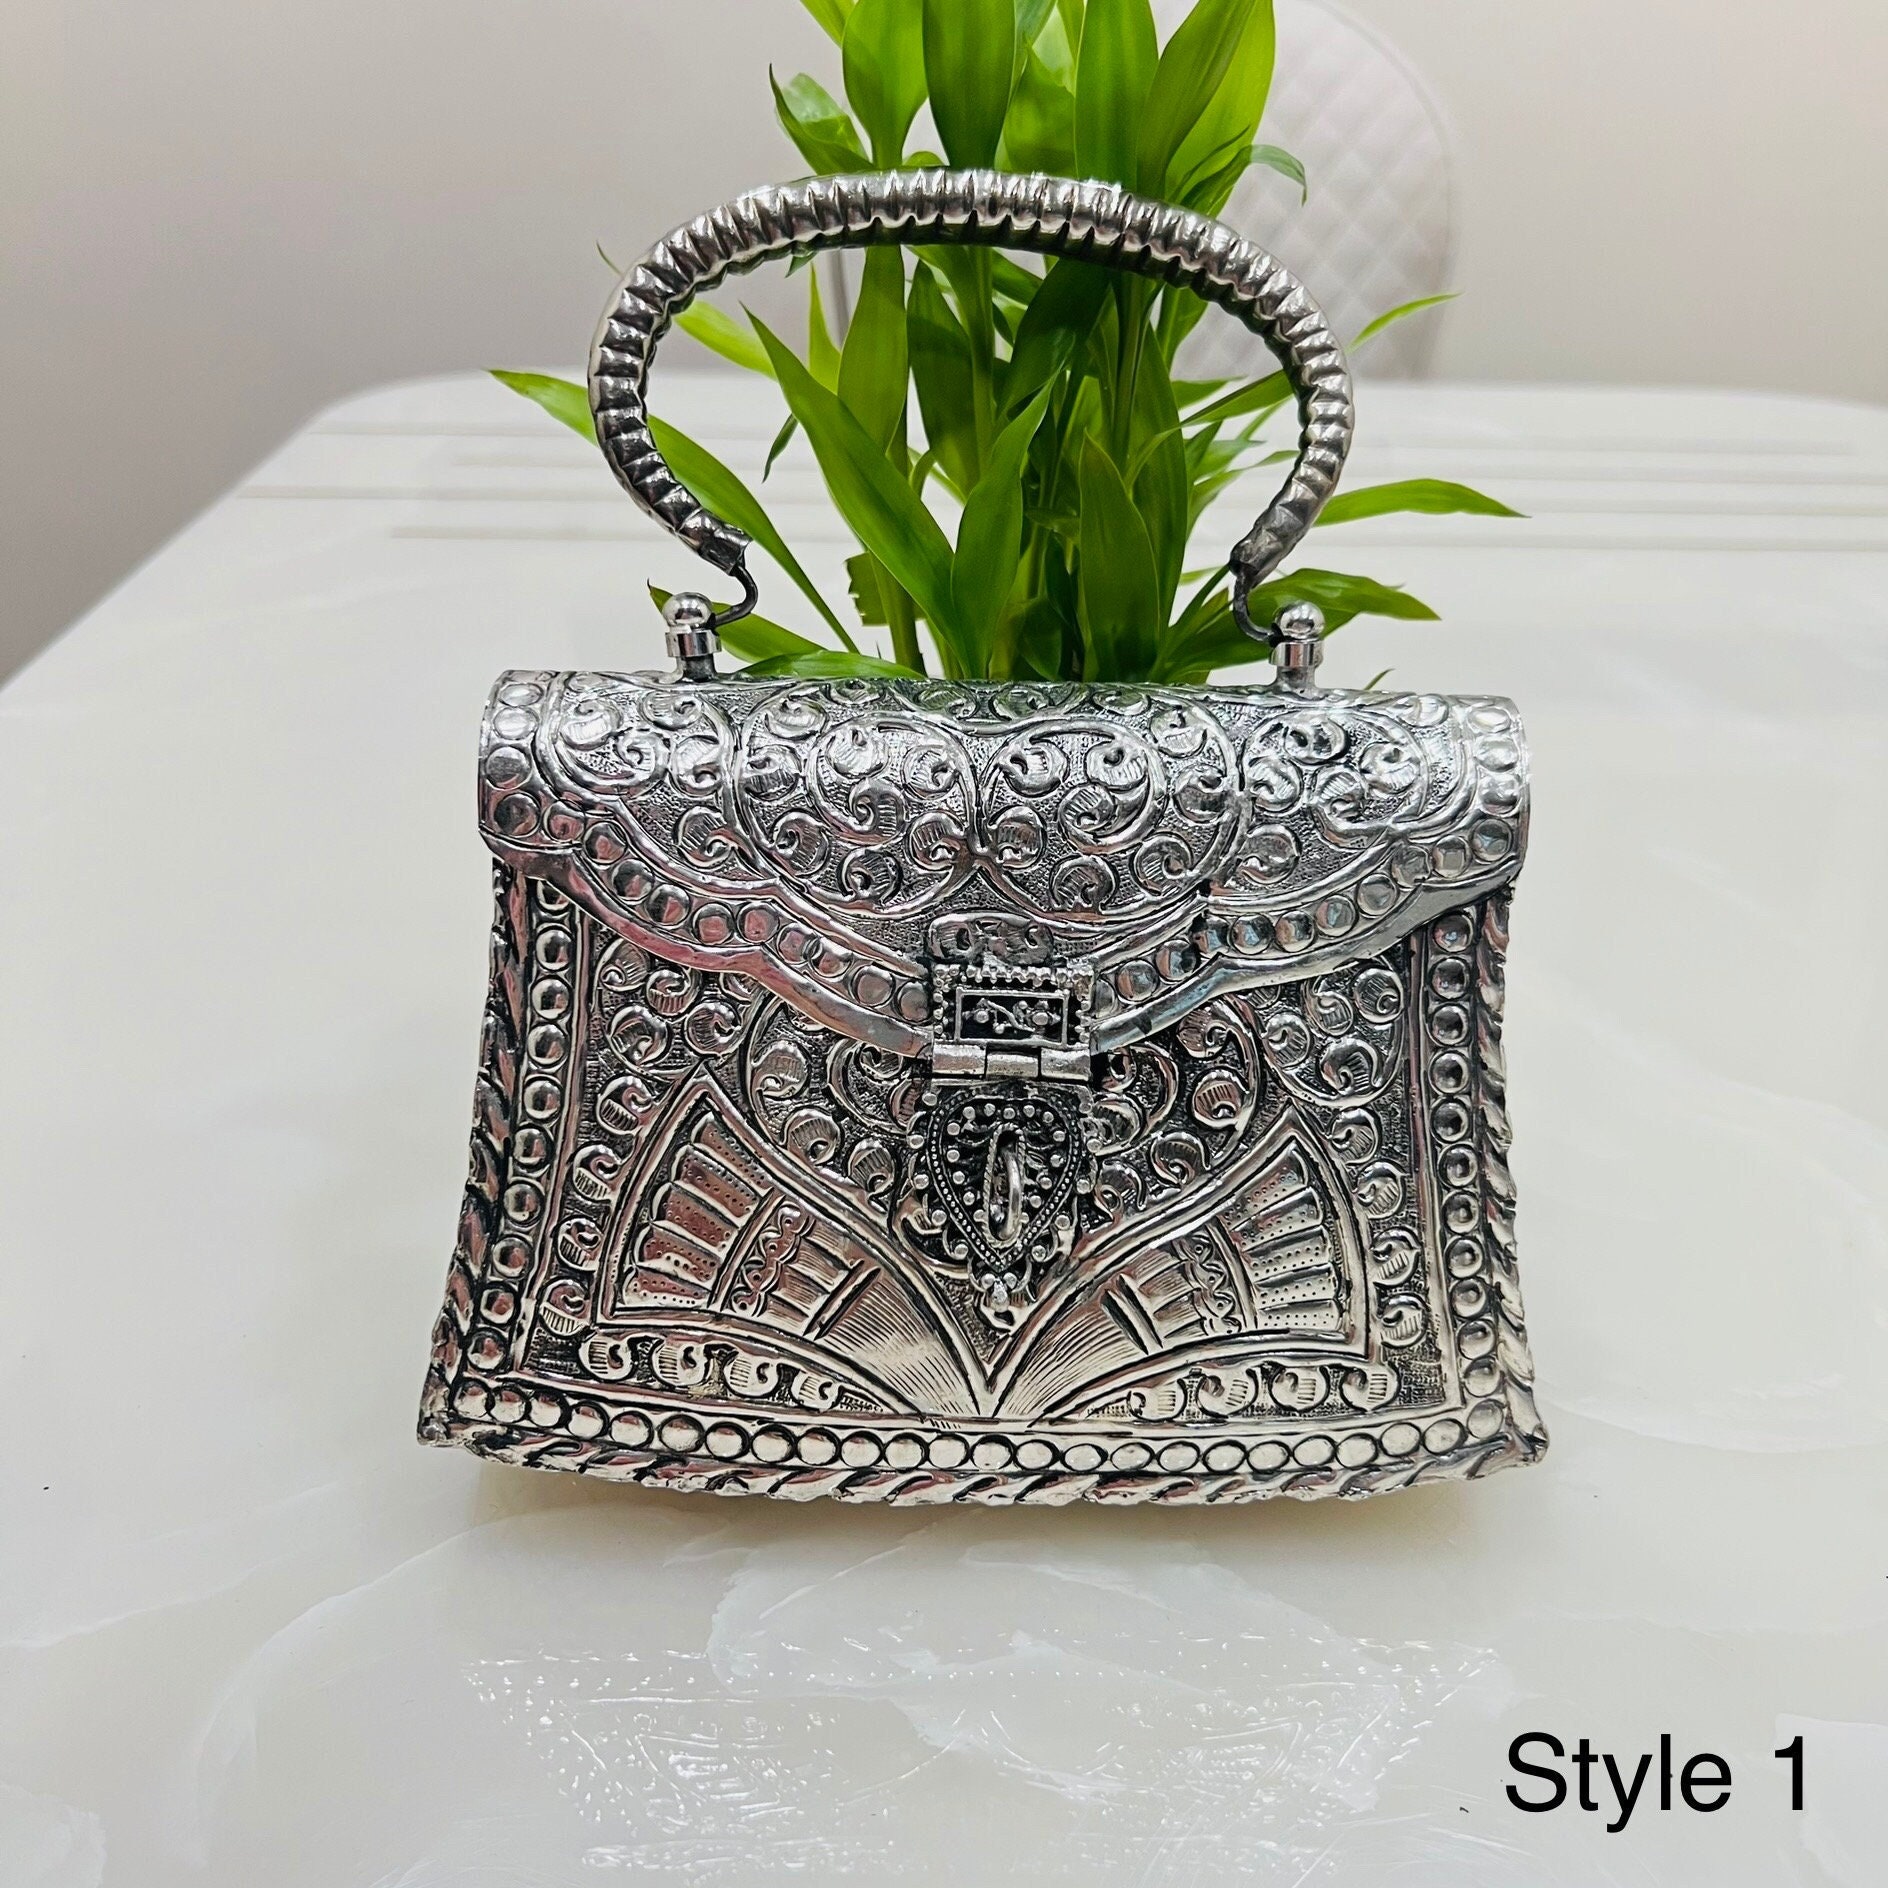 Exclusive Hand Carved High-Quality German Silver Clutch